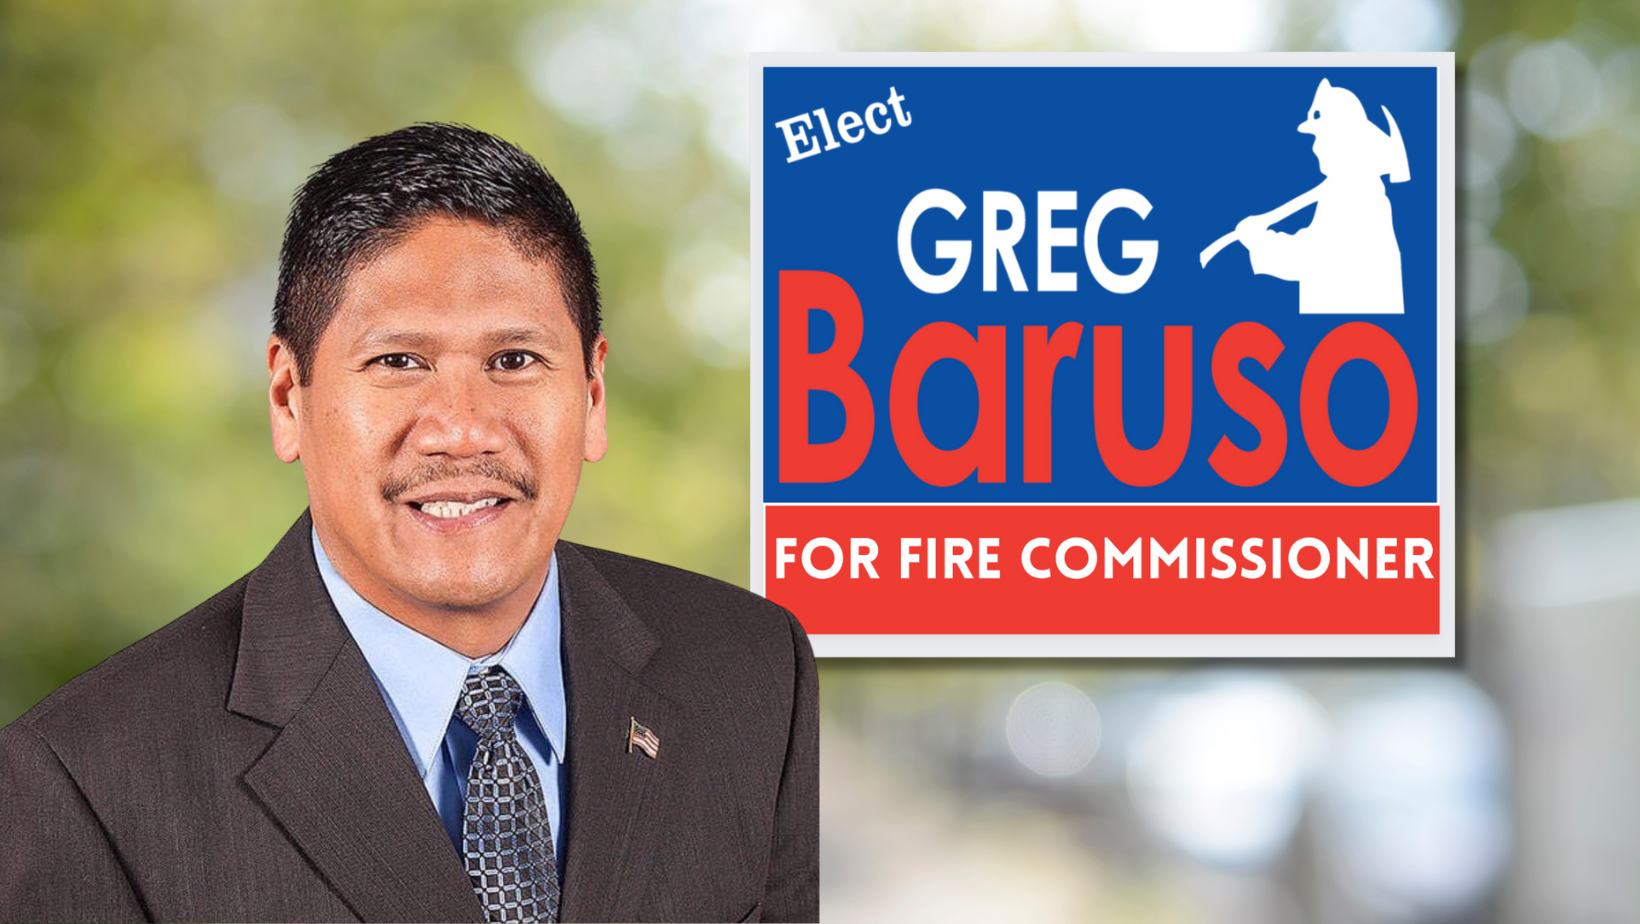 Committee to Elect Greg Baruso